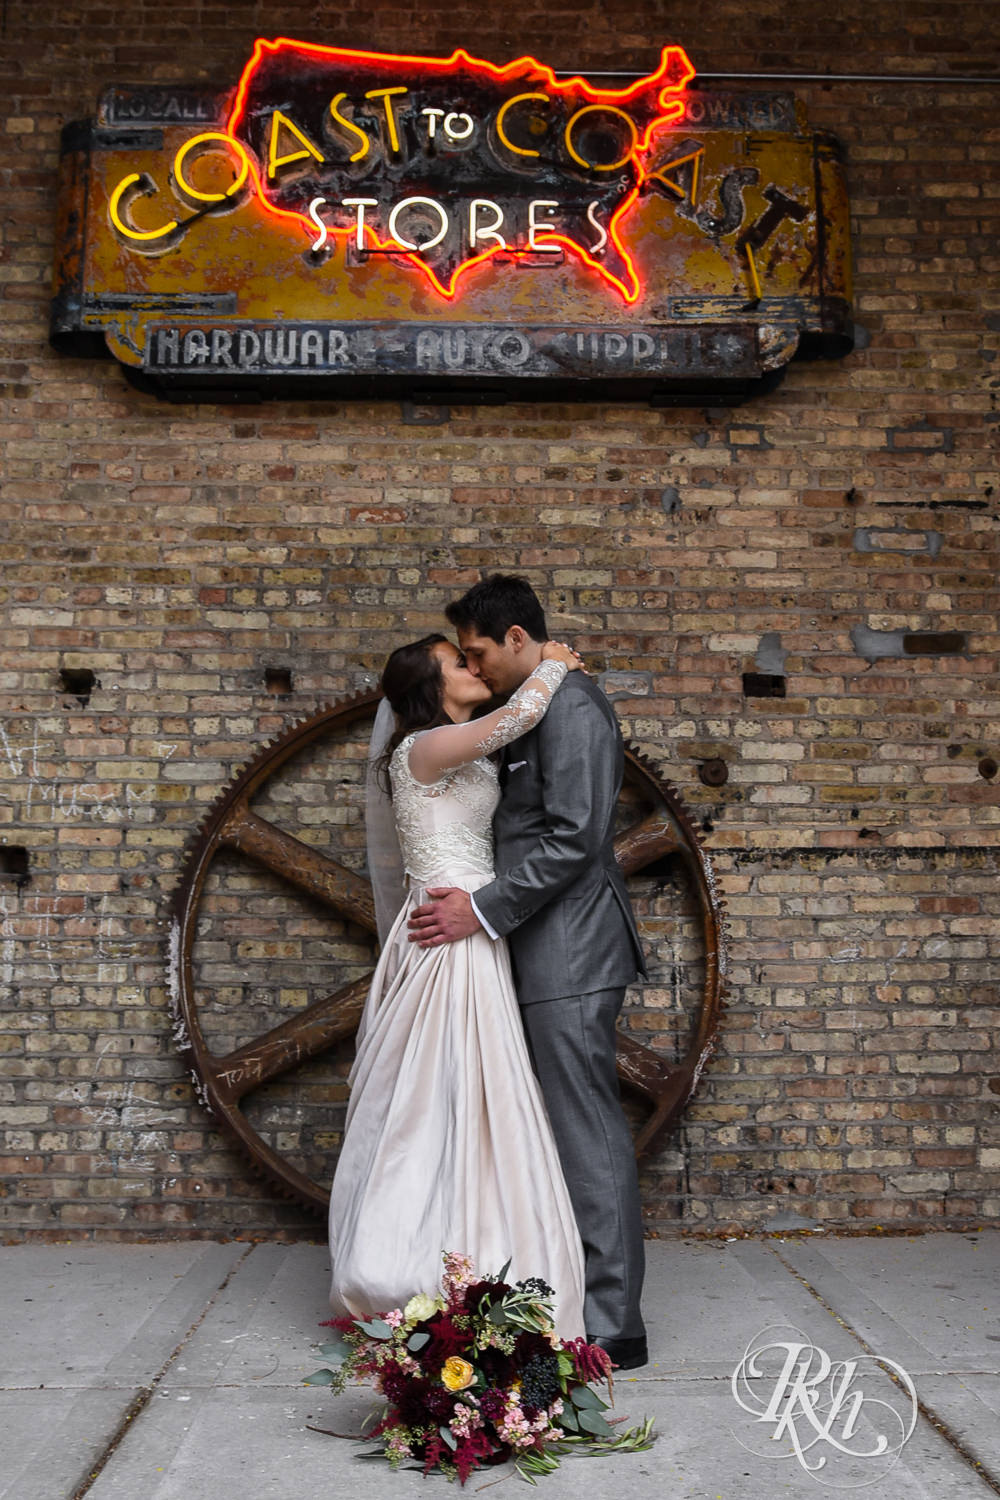 Bride and groom kiss against brick wall on a rainy wedding day in Minneapolis, Minnesota.